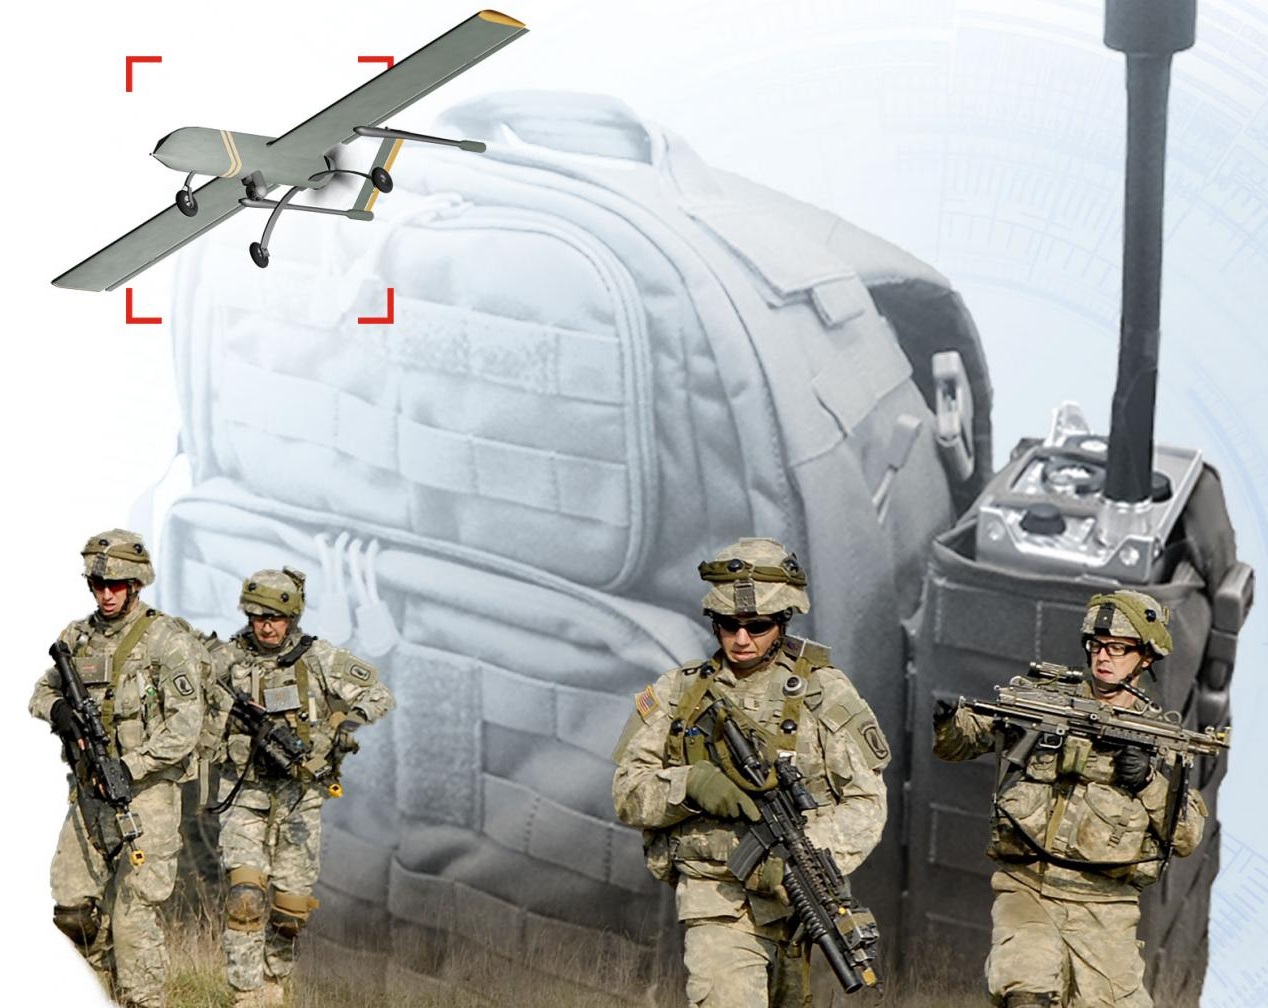 CACI Awarded $82M Contract to Provide Electronic Warfare Air/Ground Survivability Division (EWAGS) to US Army